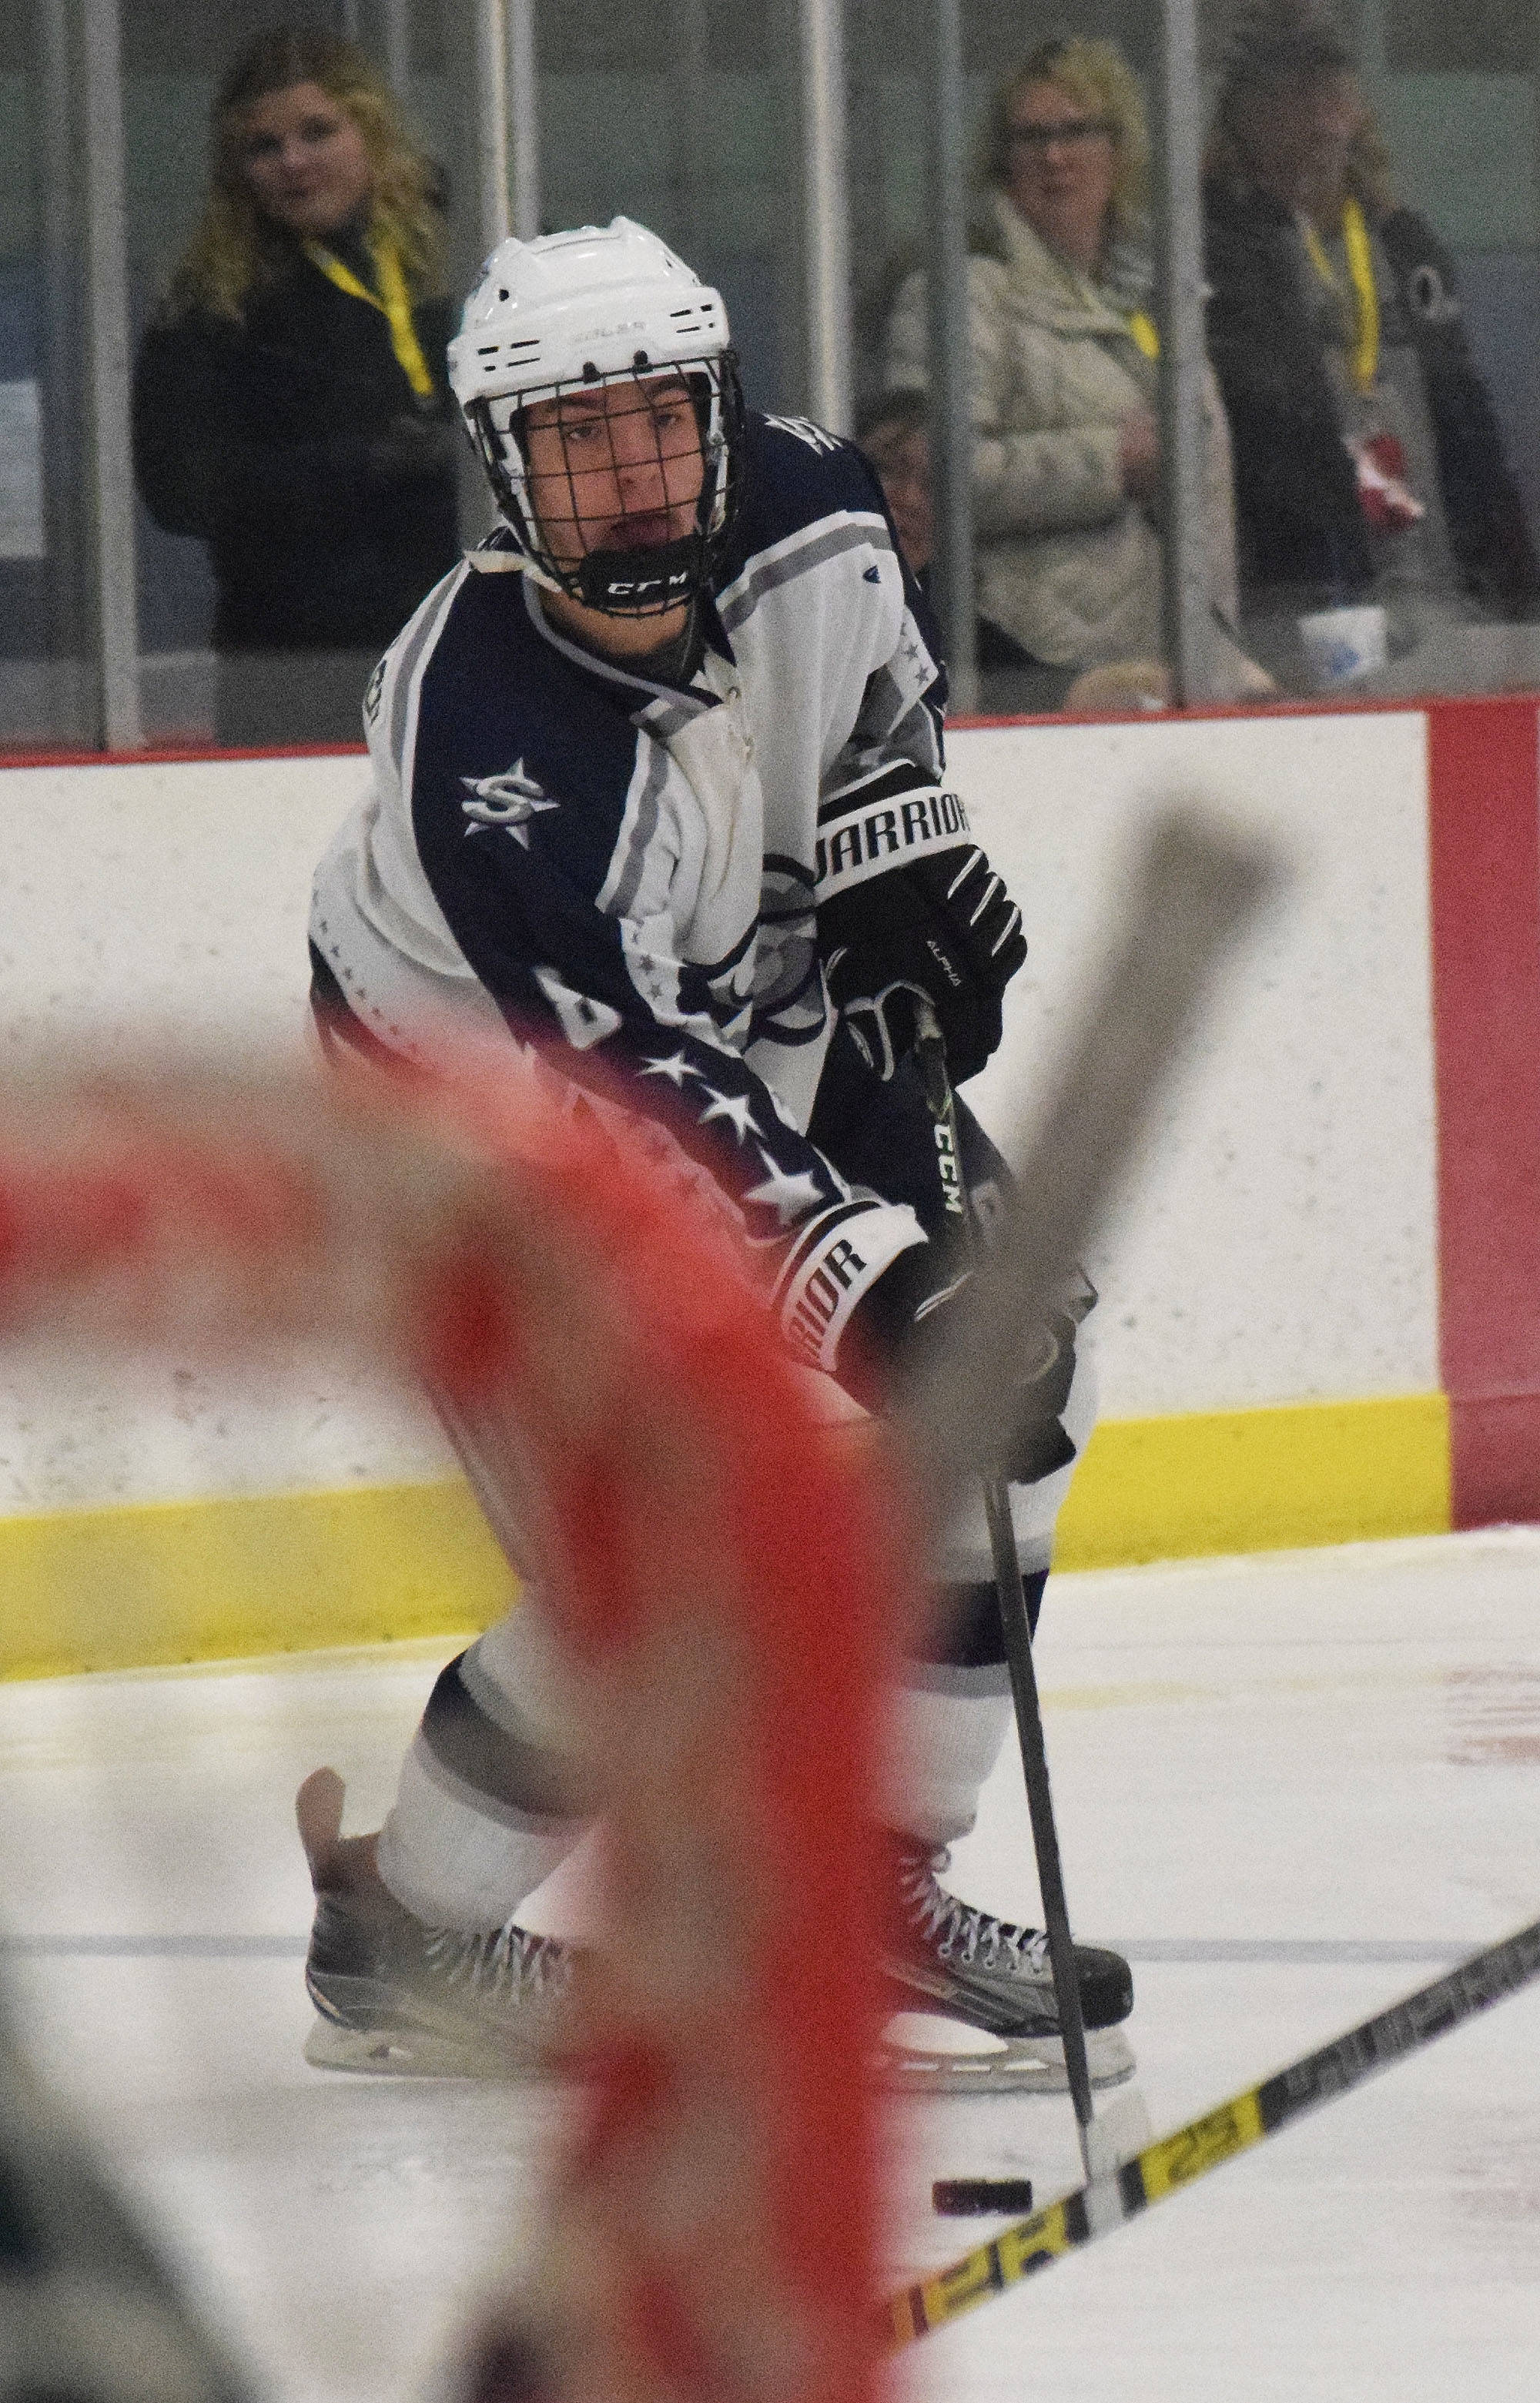 Soldotna’s J.D. Schmelzenbach looks for an open shot Thursday against the Delta Huskies at the Div. II state hockey championship tournament in Wasilla. (Photo by Joey Klecka/Peninsula Clarion)